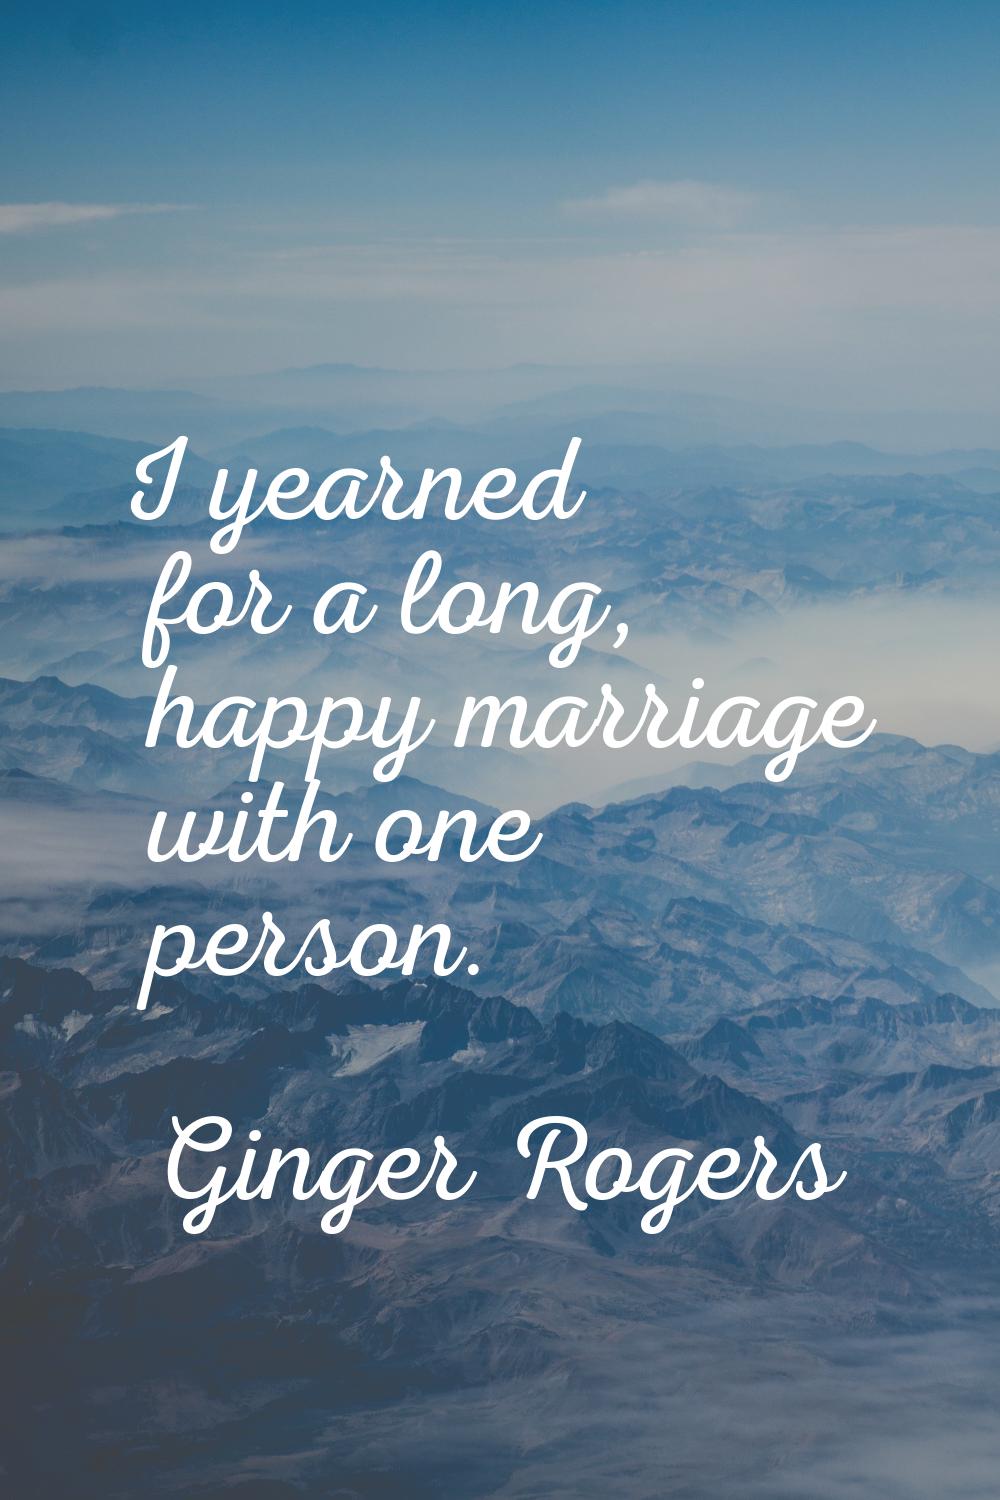 I yearned for a long, happy marriage with one person.